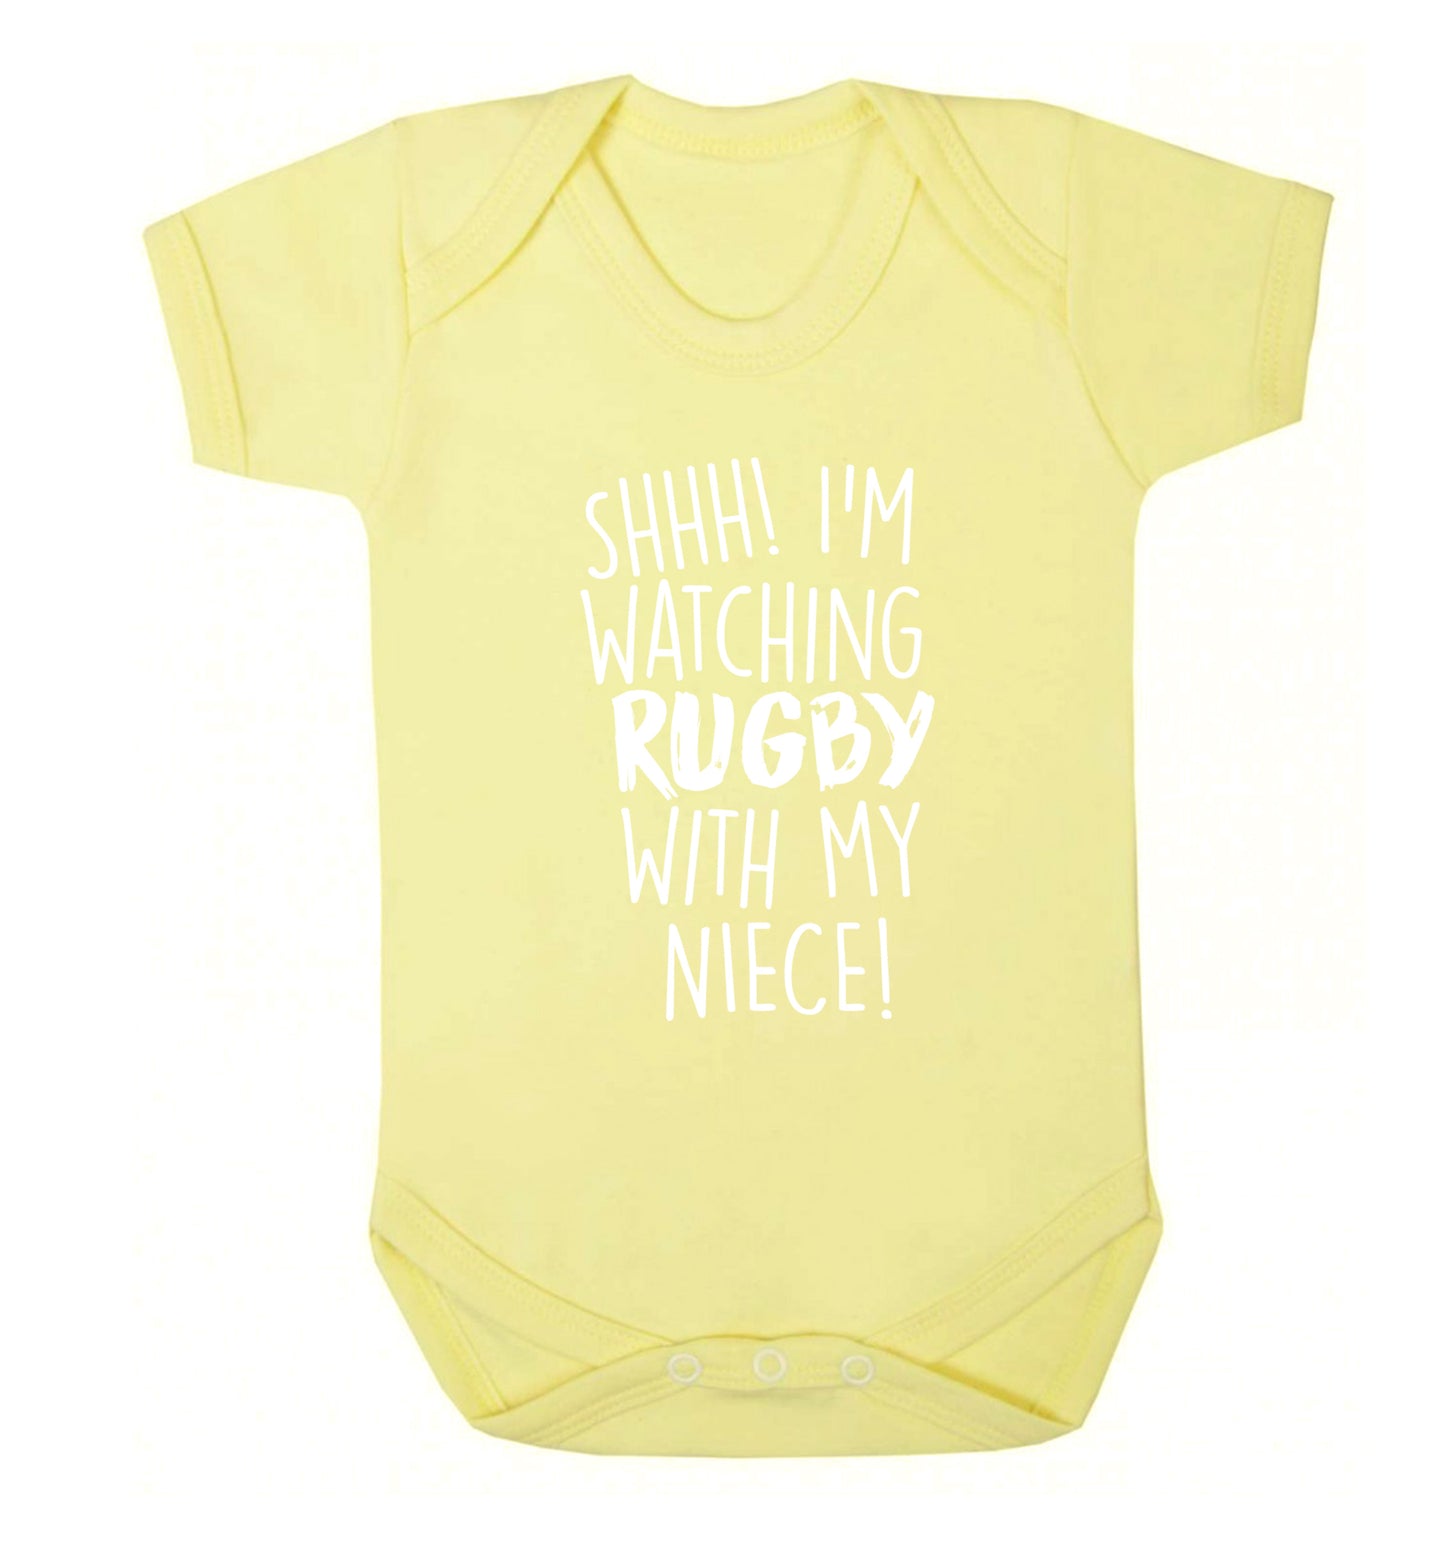 Shh.. I'm watching rugby with my niece Baby Vest pale yellow 18-24 months